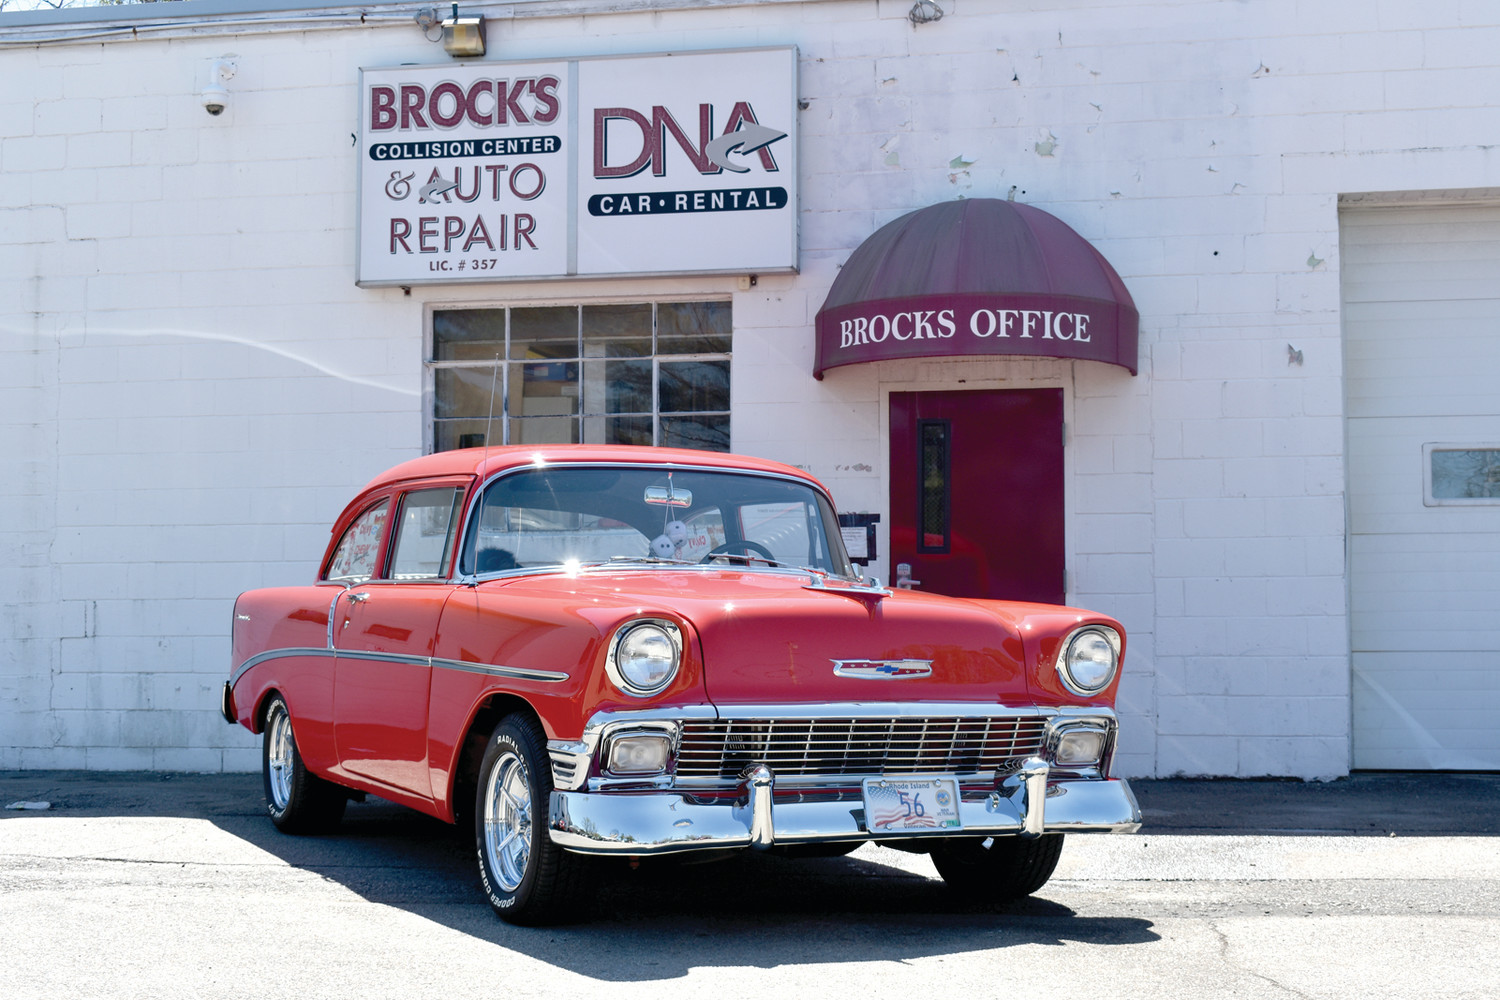 This head-turning, custom 1956 Chevrolet 210 Series Sports Coupe has just undergone a major restoration. It has been flawlessly returned to its original glory by the team of experts at Brock’s Collision Center & Auto Repair.